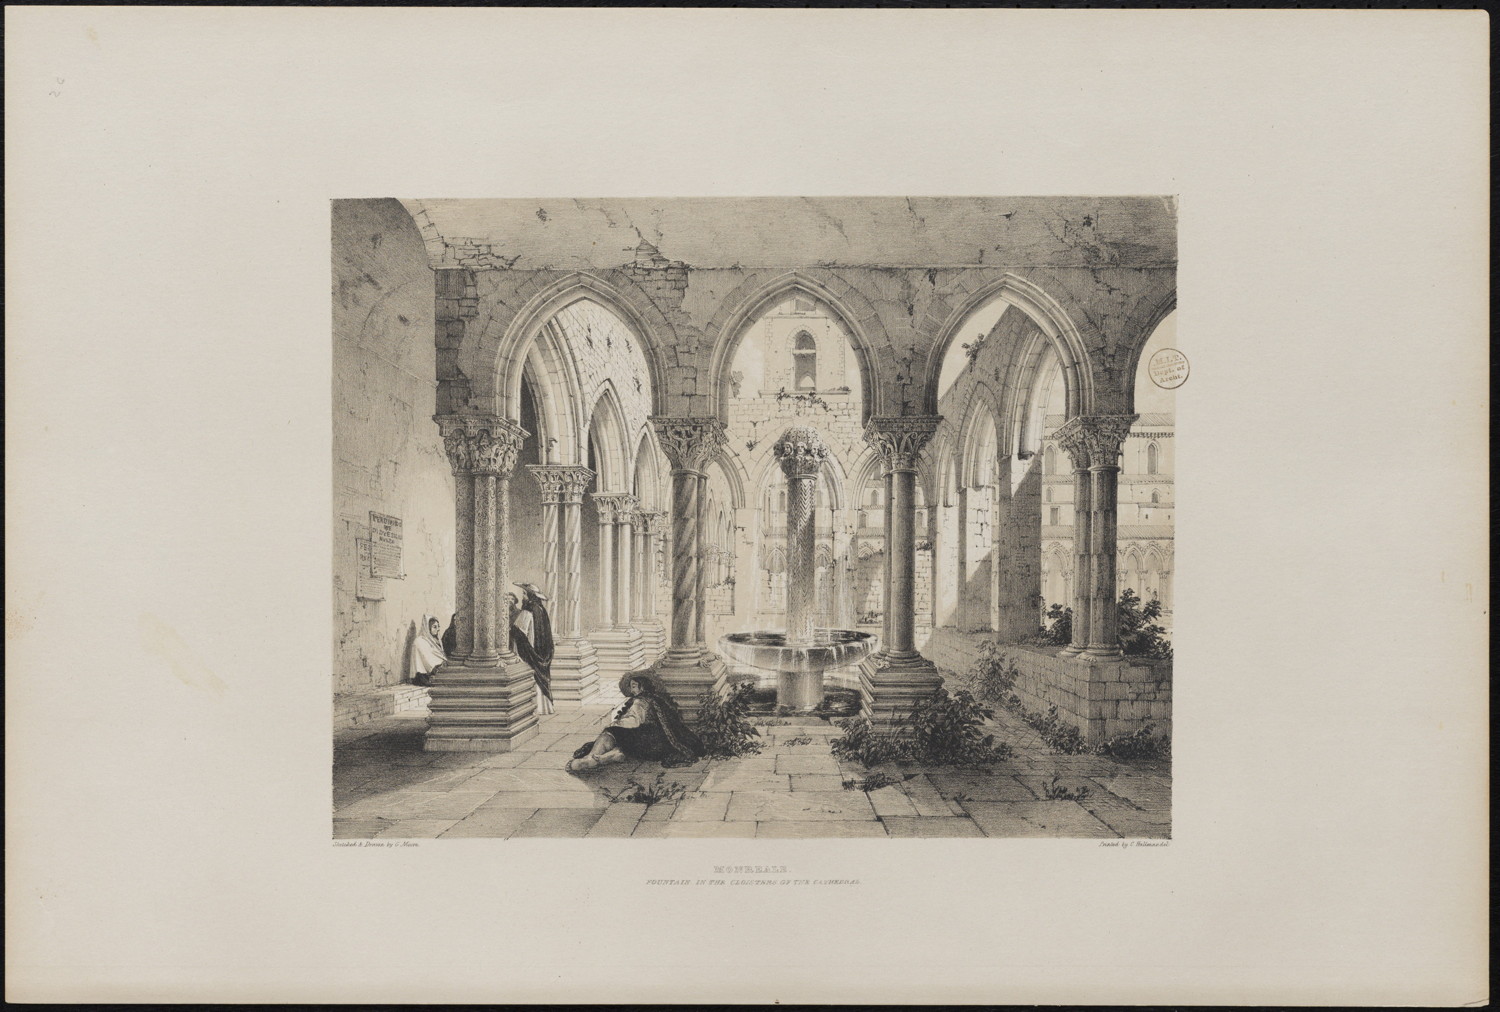 Lithograph of the cloister with fountain